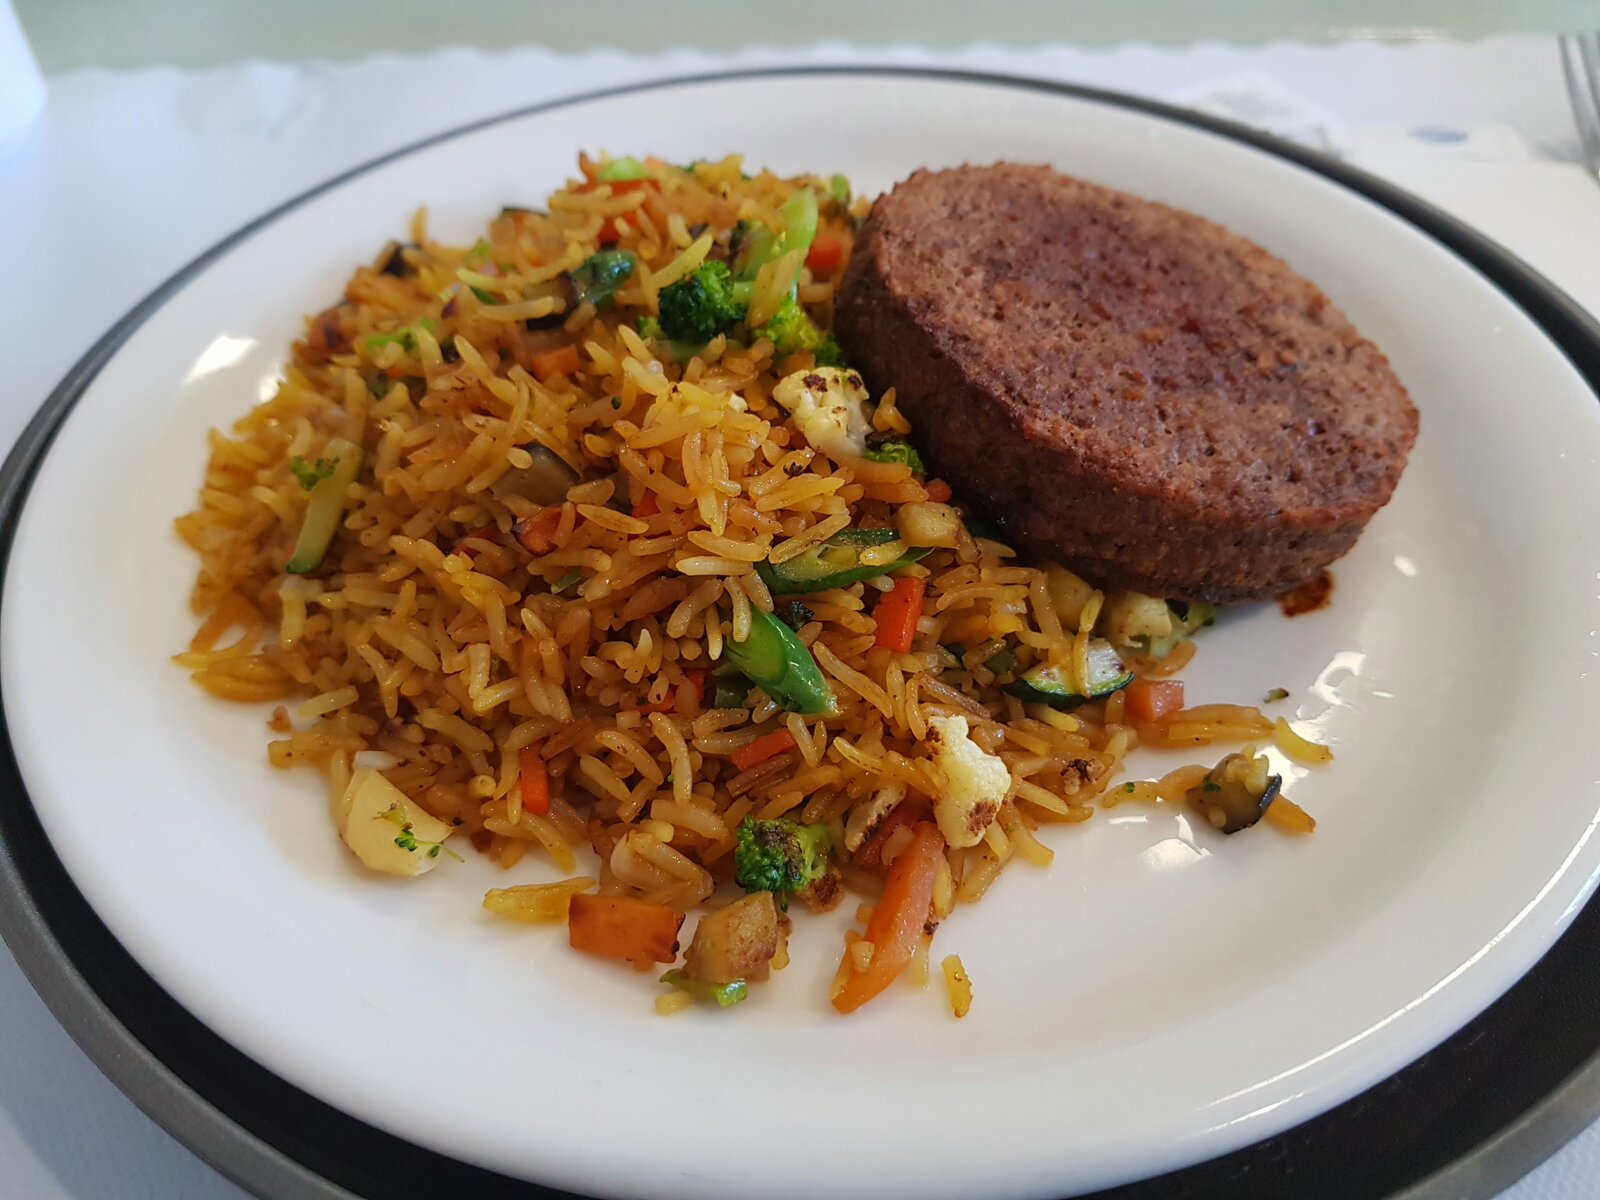 Vegan Pattie with vegetable fried rice